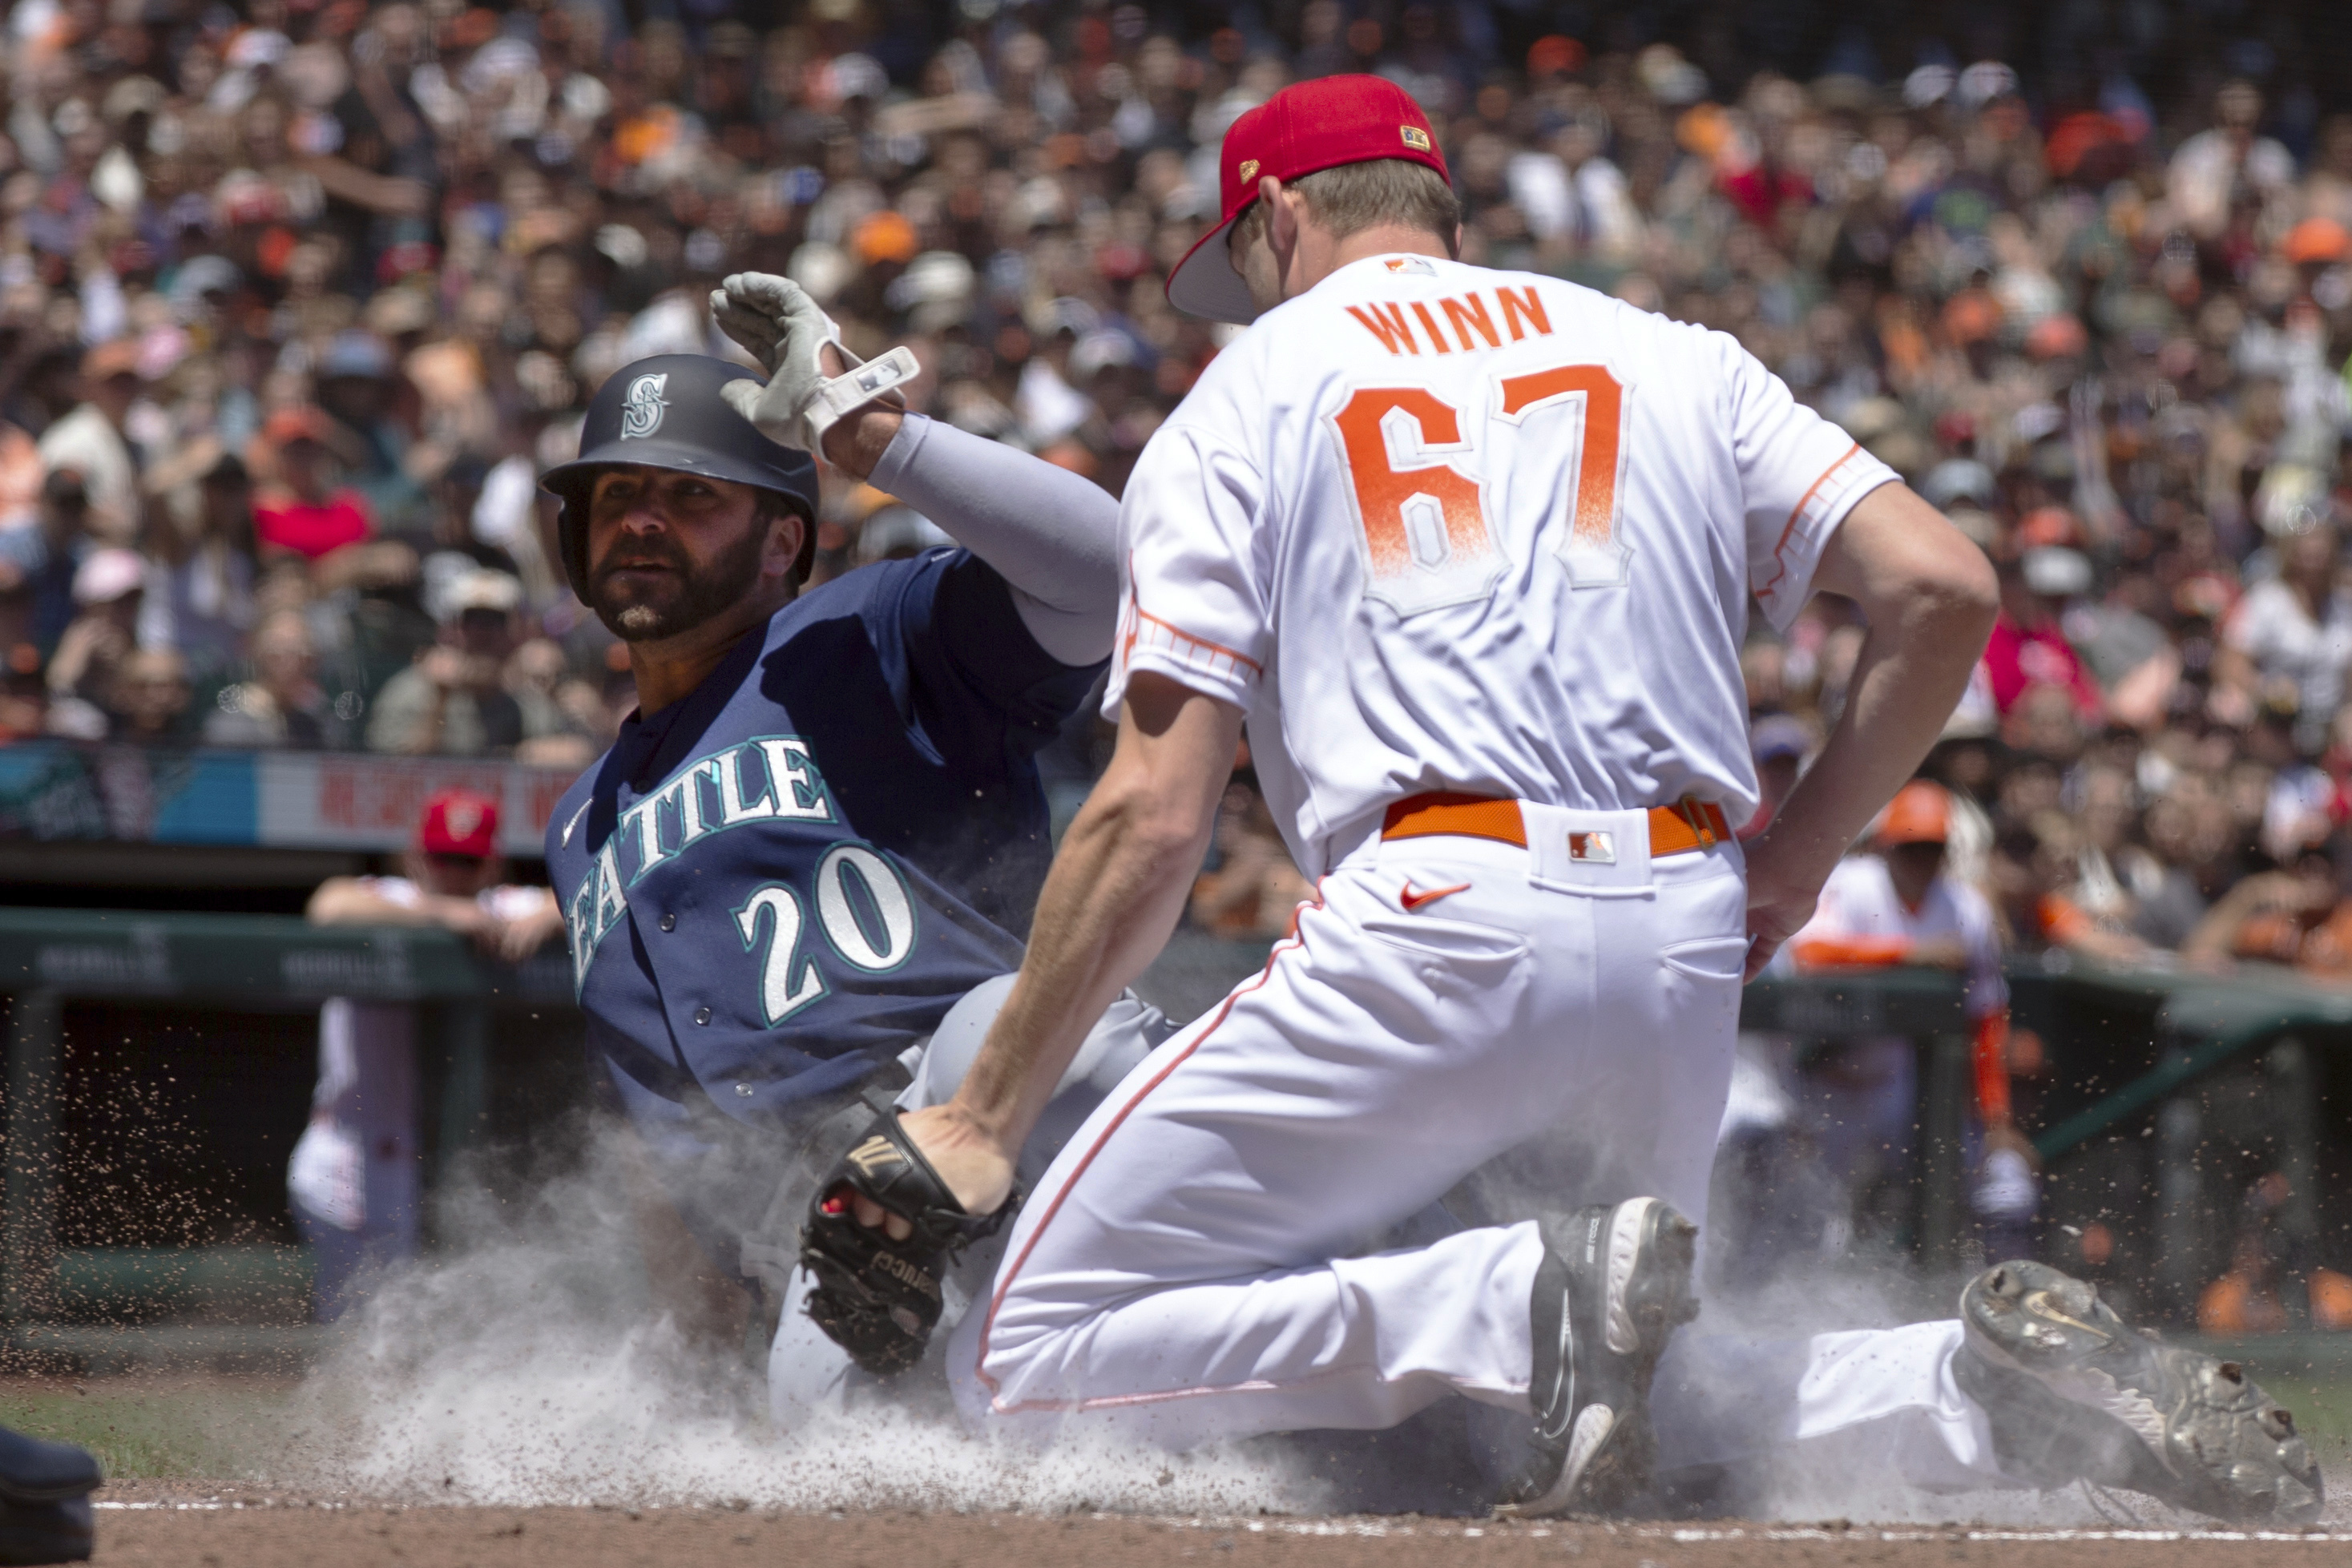 Seattle Mariners' AJ Pollock makes contact with the ball in a